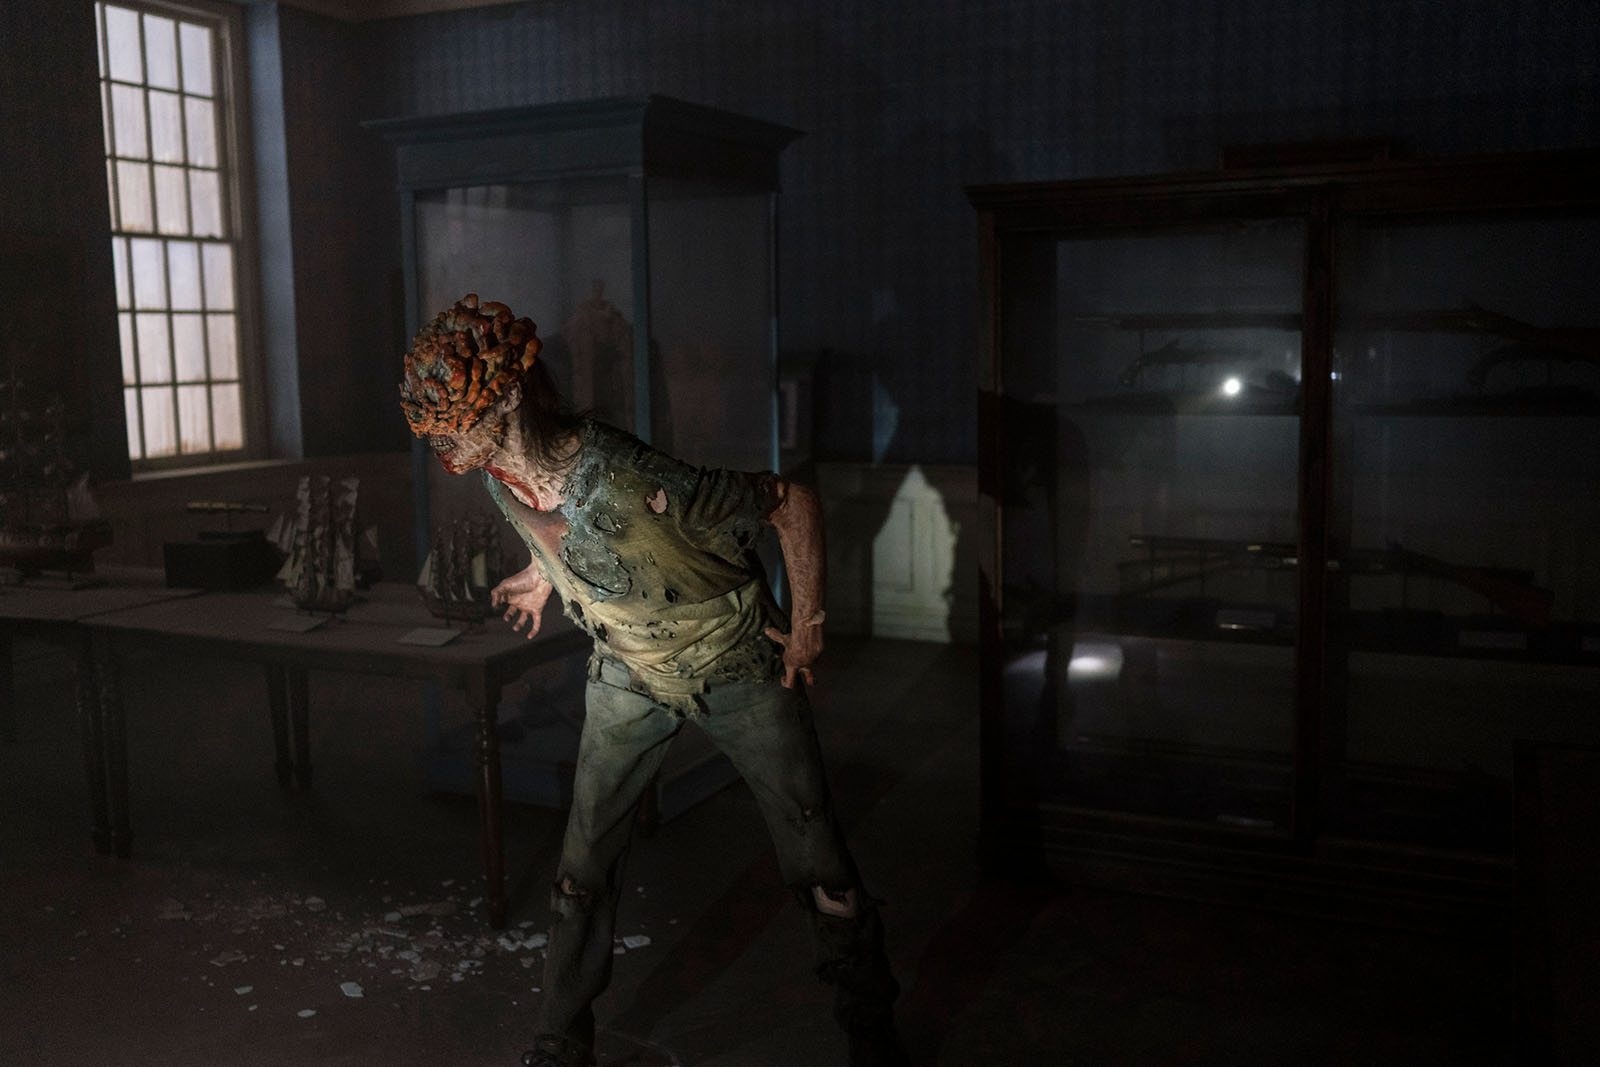 Some sequences in The Last of Us are nearly identical to the game. Image © HBO